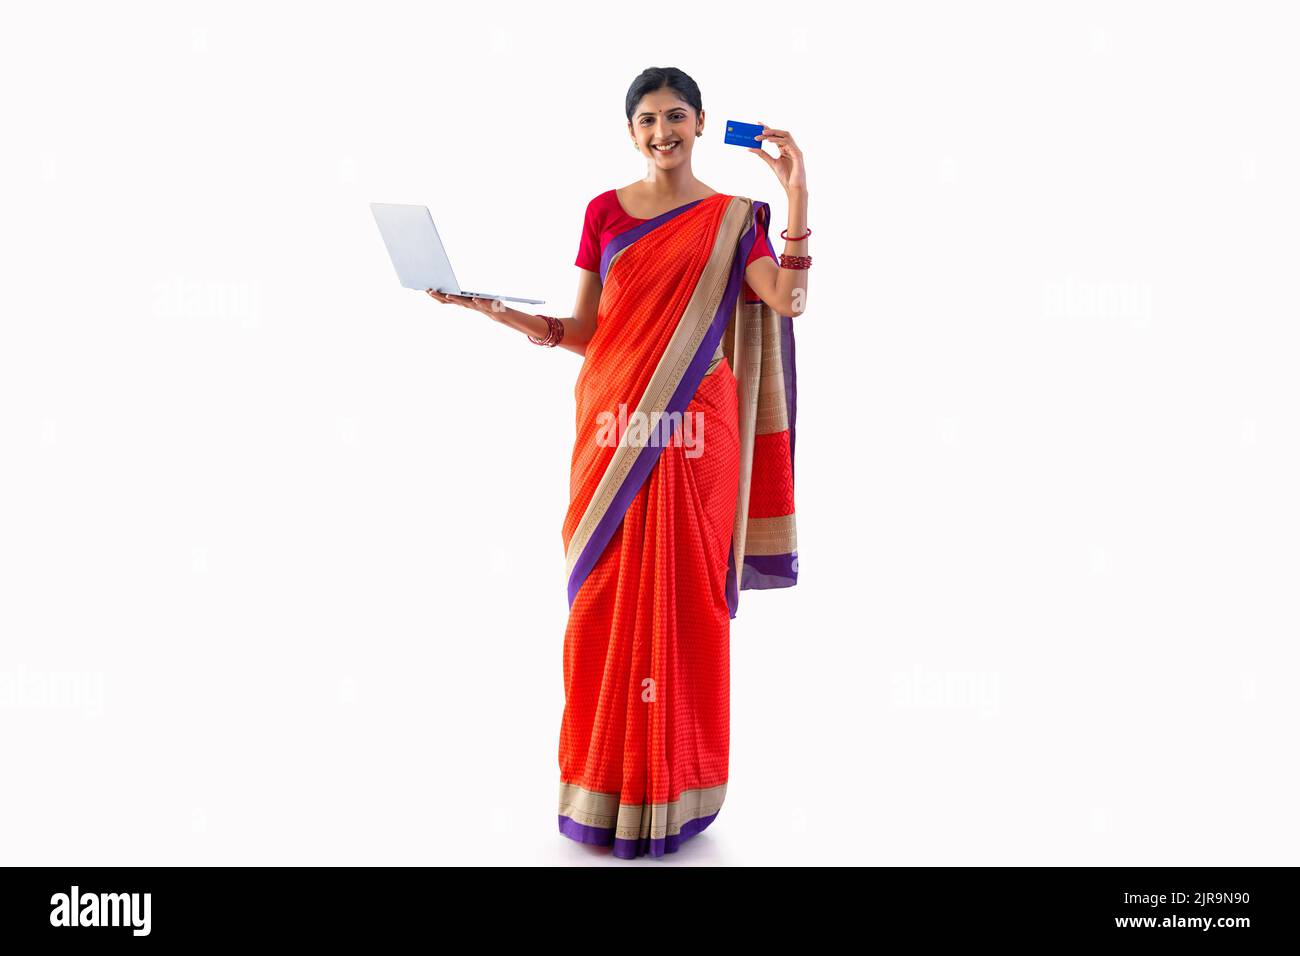 Portrait of a young woman holding laptop and showing credit card Stock Photo